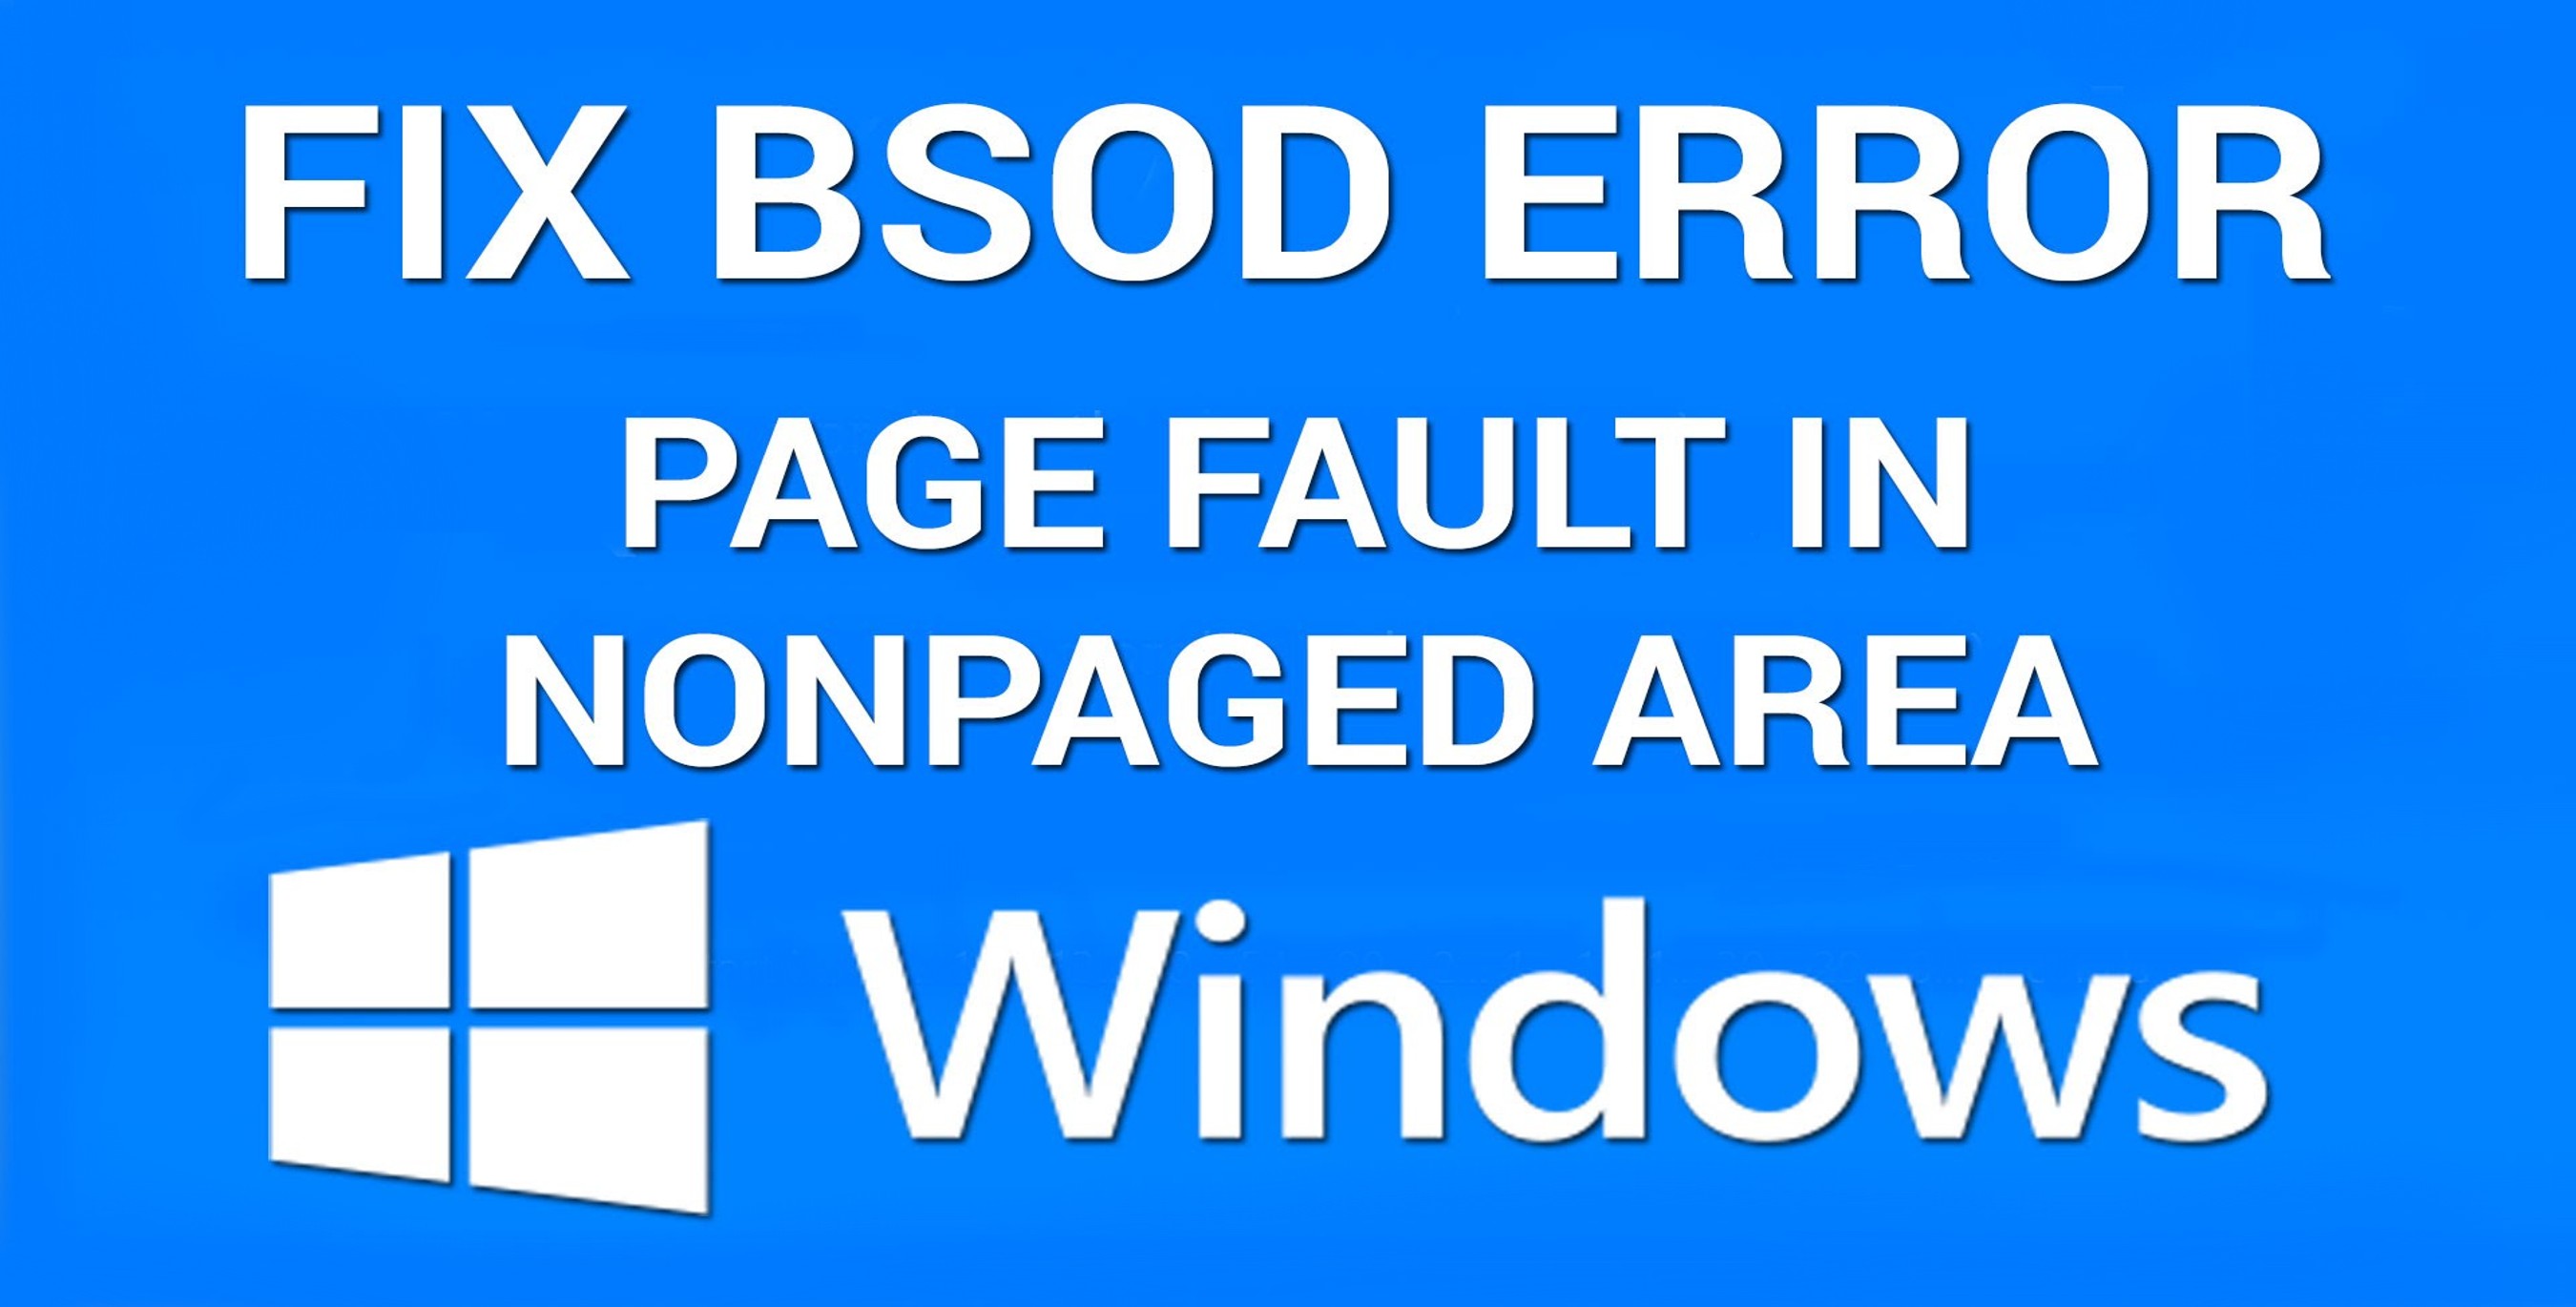 Page Fault in NONPAGED area Windows 10. Page_Fault_in_NONPAGED_area Windows 7. BSOD. How to Fix BSOD. Ошибка page in nonpaged area